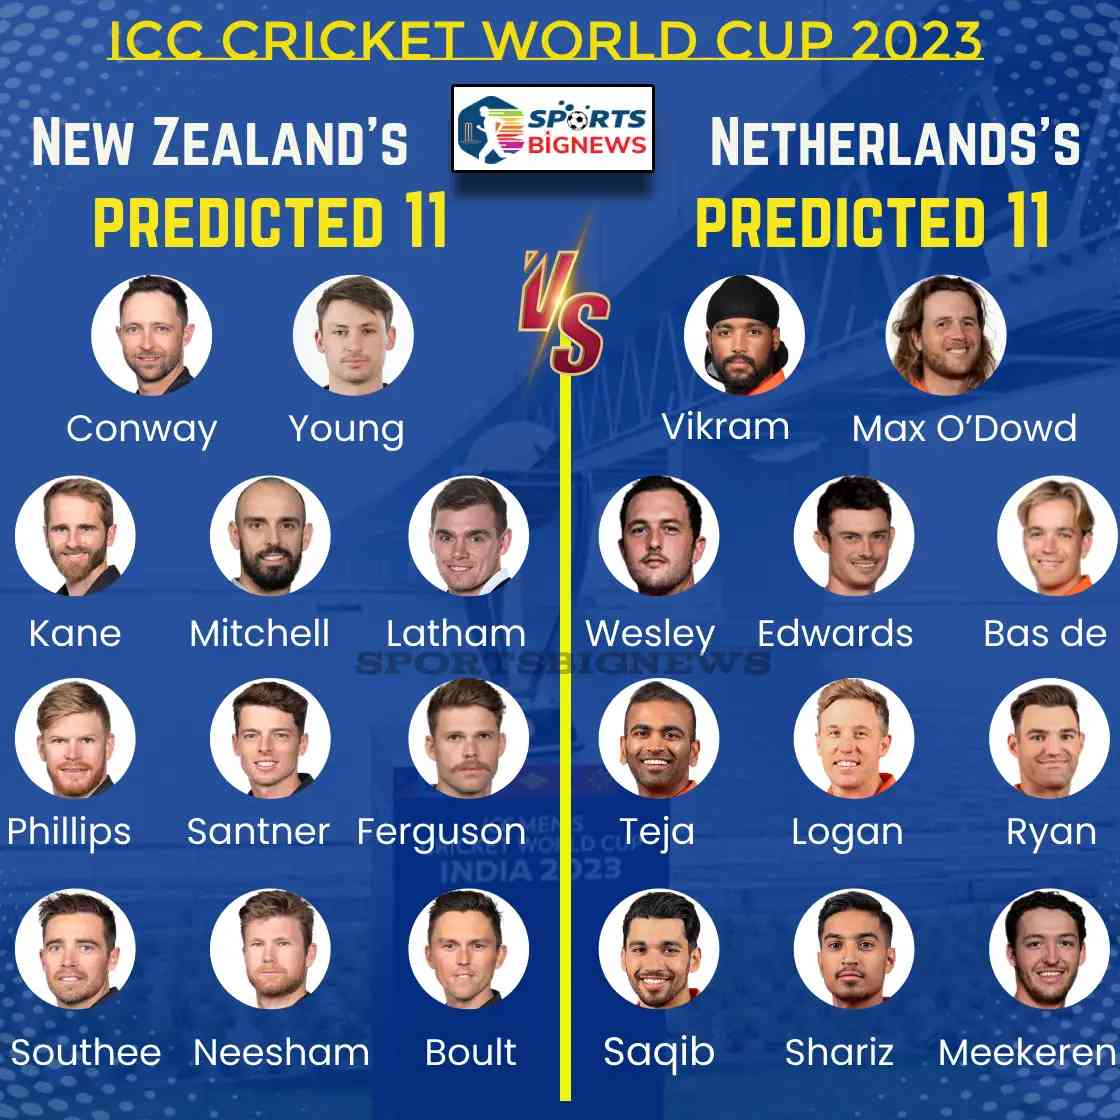 New Zealand vs Netherlands , Dream11, Playing, Team Analysis Cricket World Cup 2023